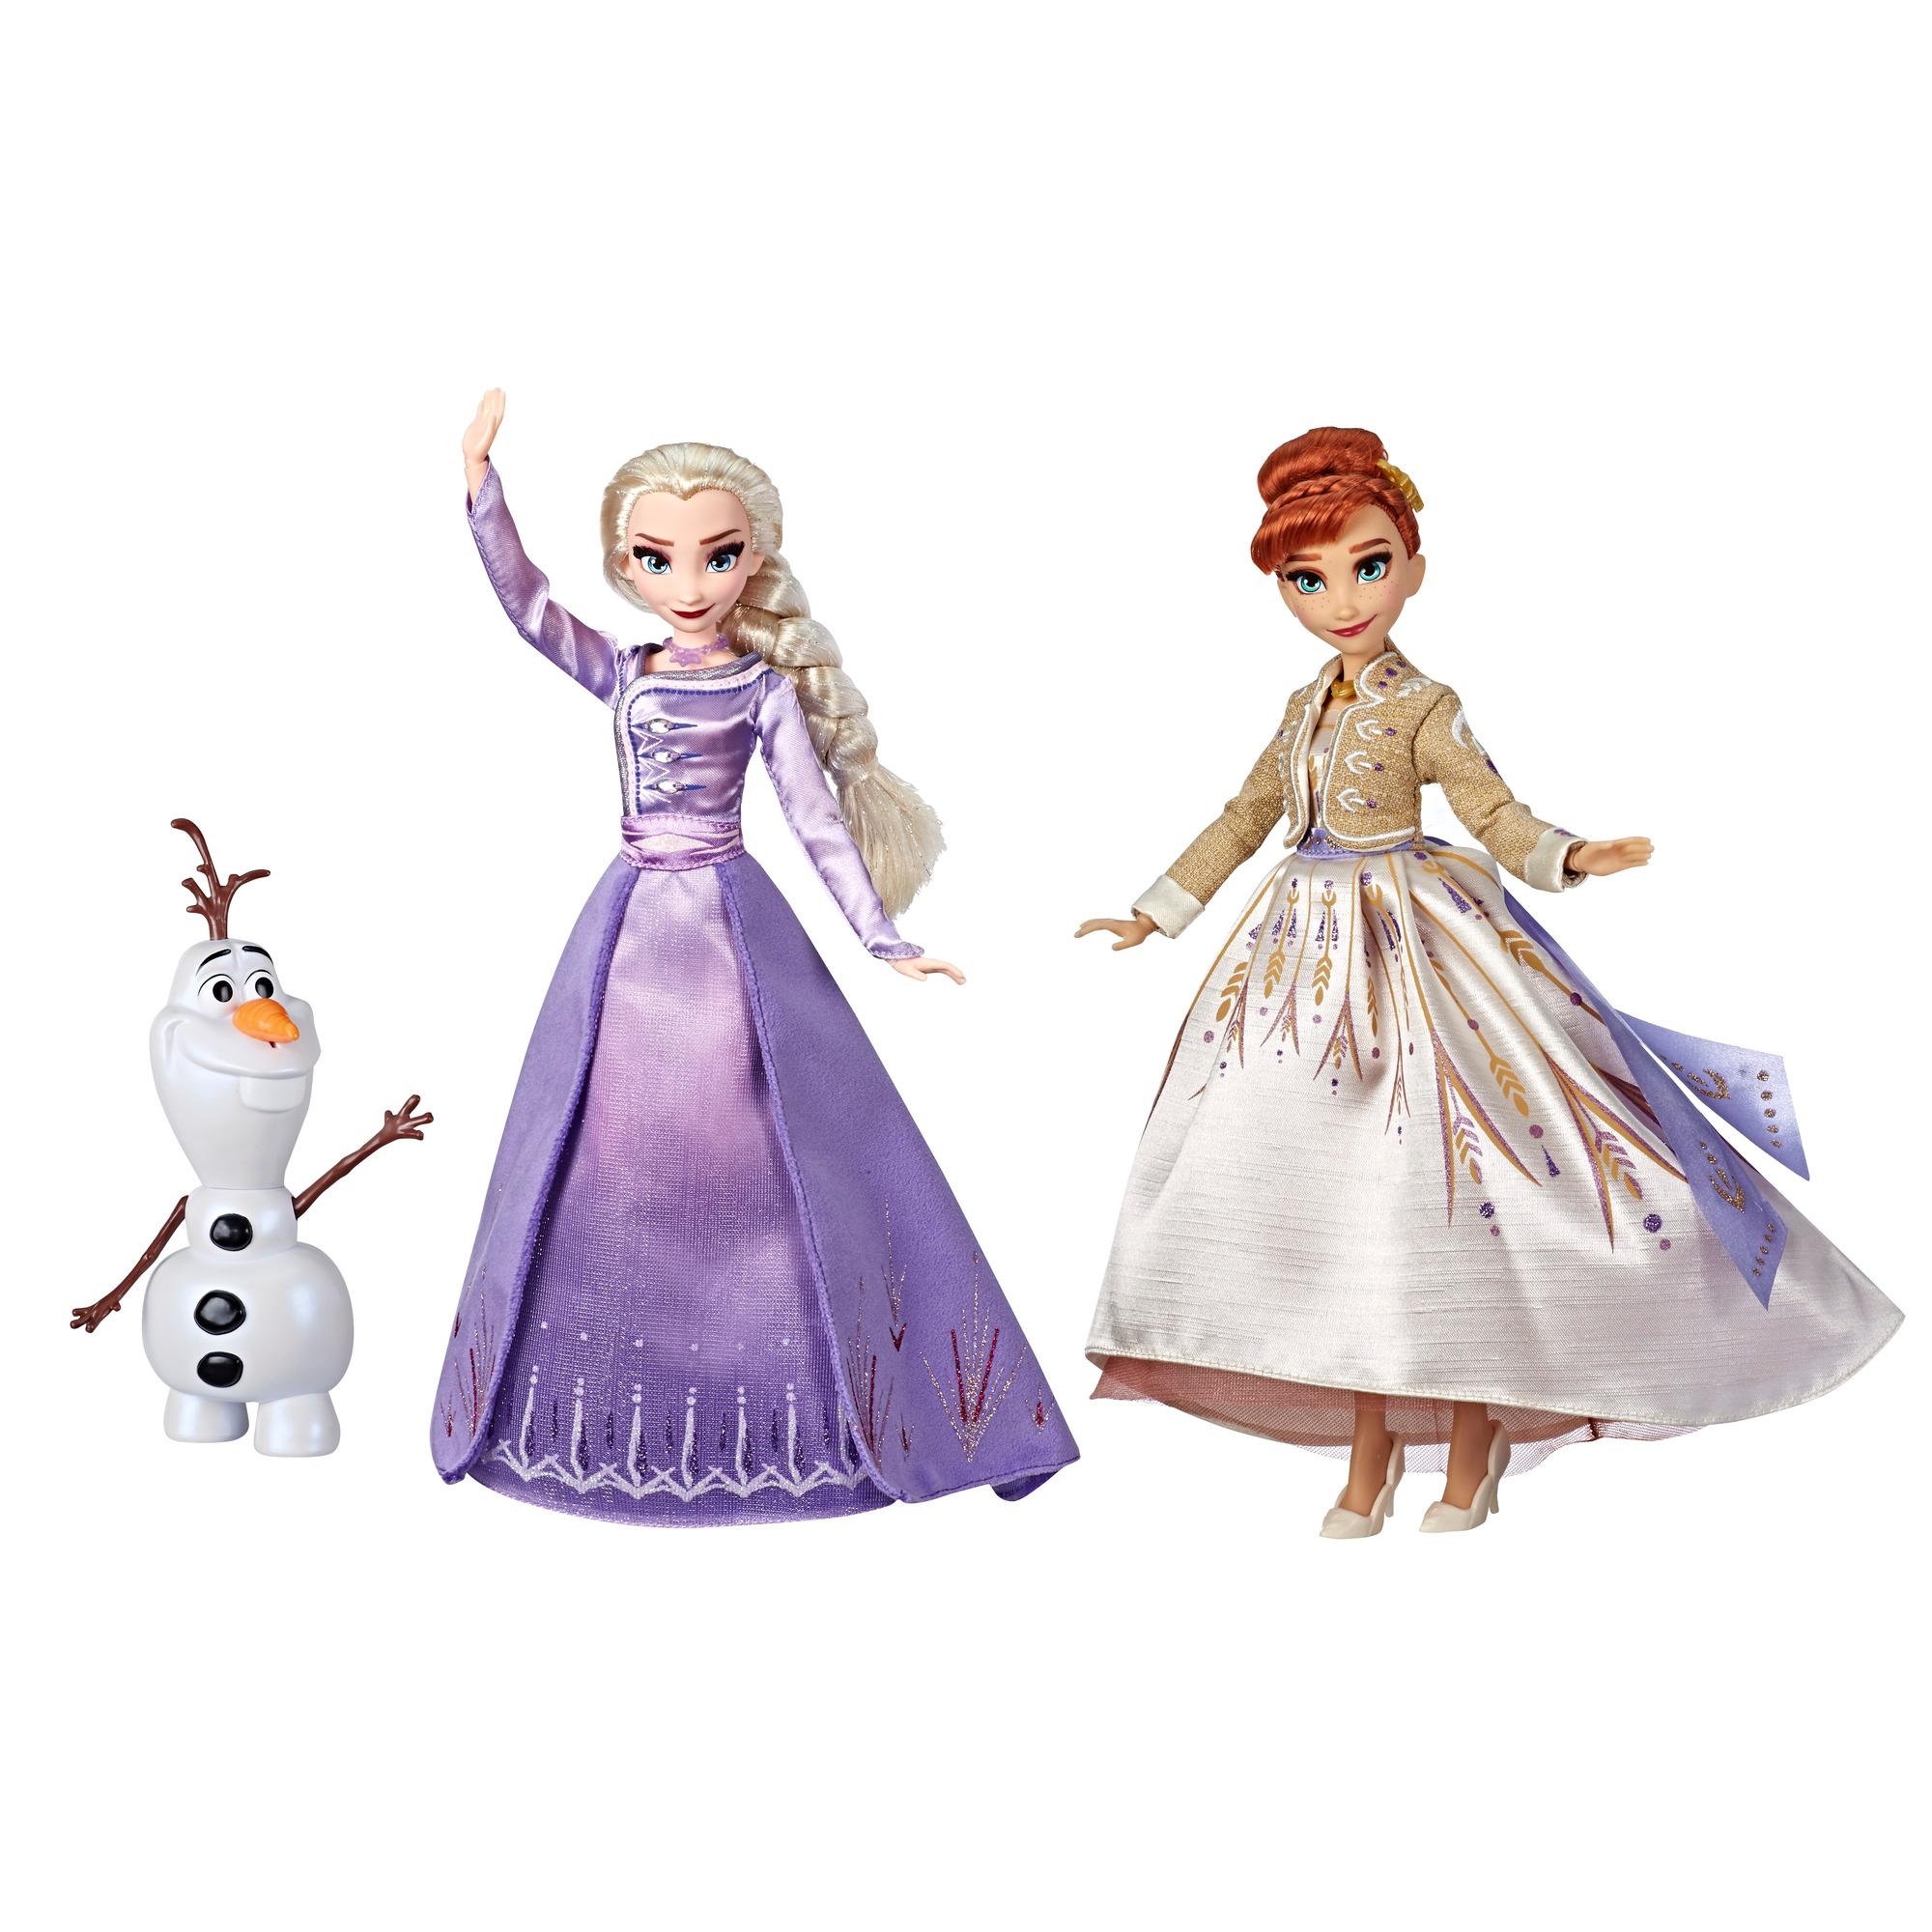 Baan Botsing Arbeid Disney Frozen Elsa, Anna, and Olaf Fashion Doll Set With Dresses and Shoes,  Toy Inspired by Disney's Frozen 2 | Frozen